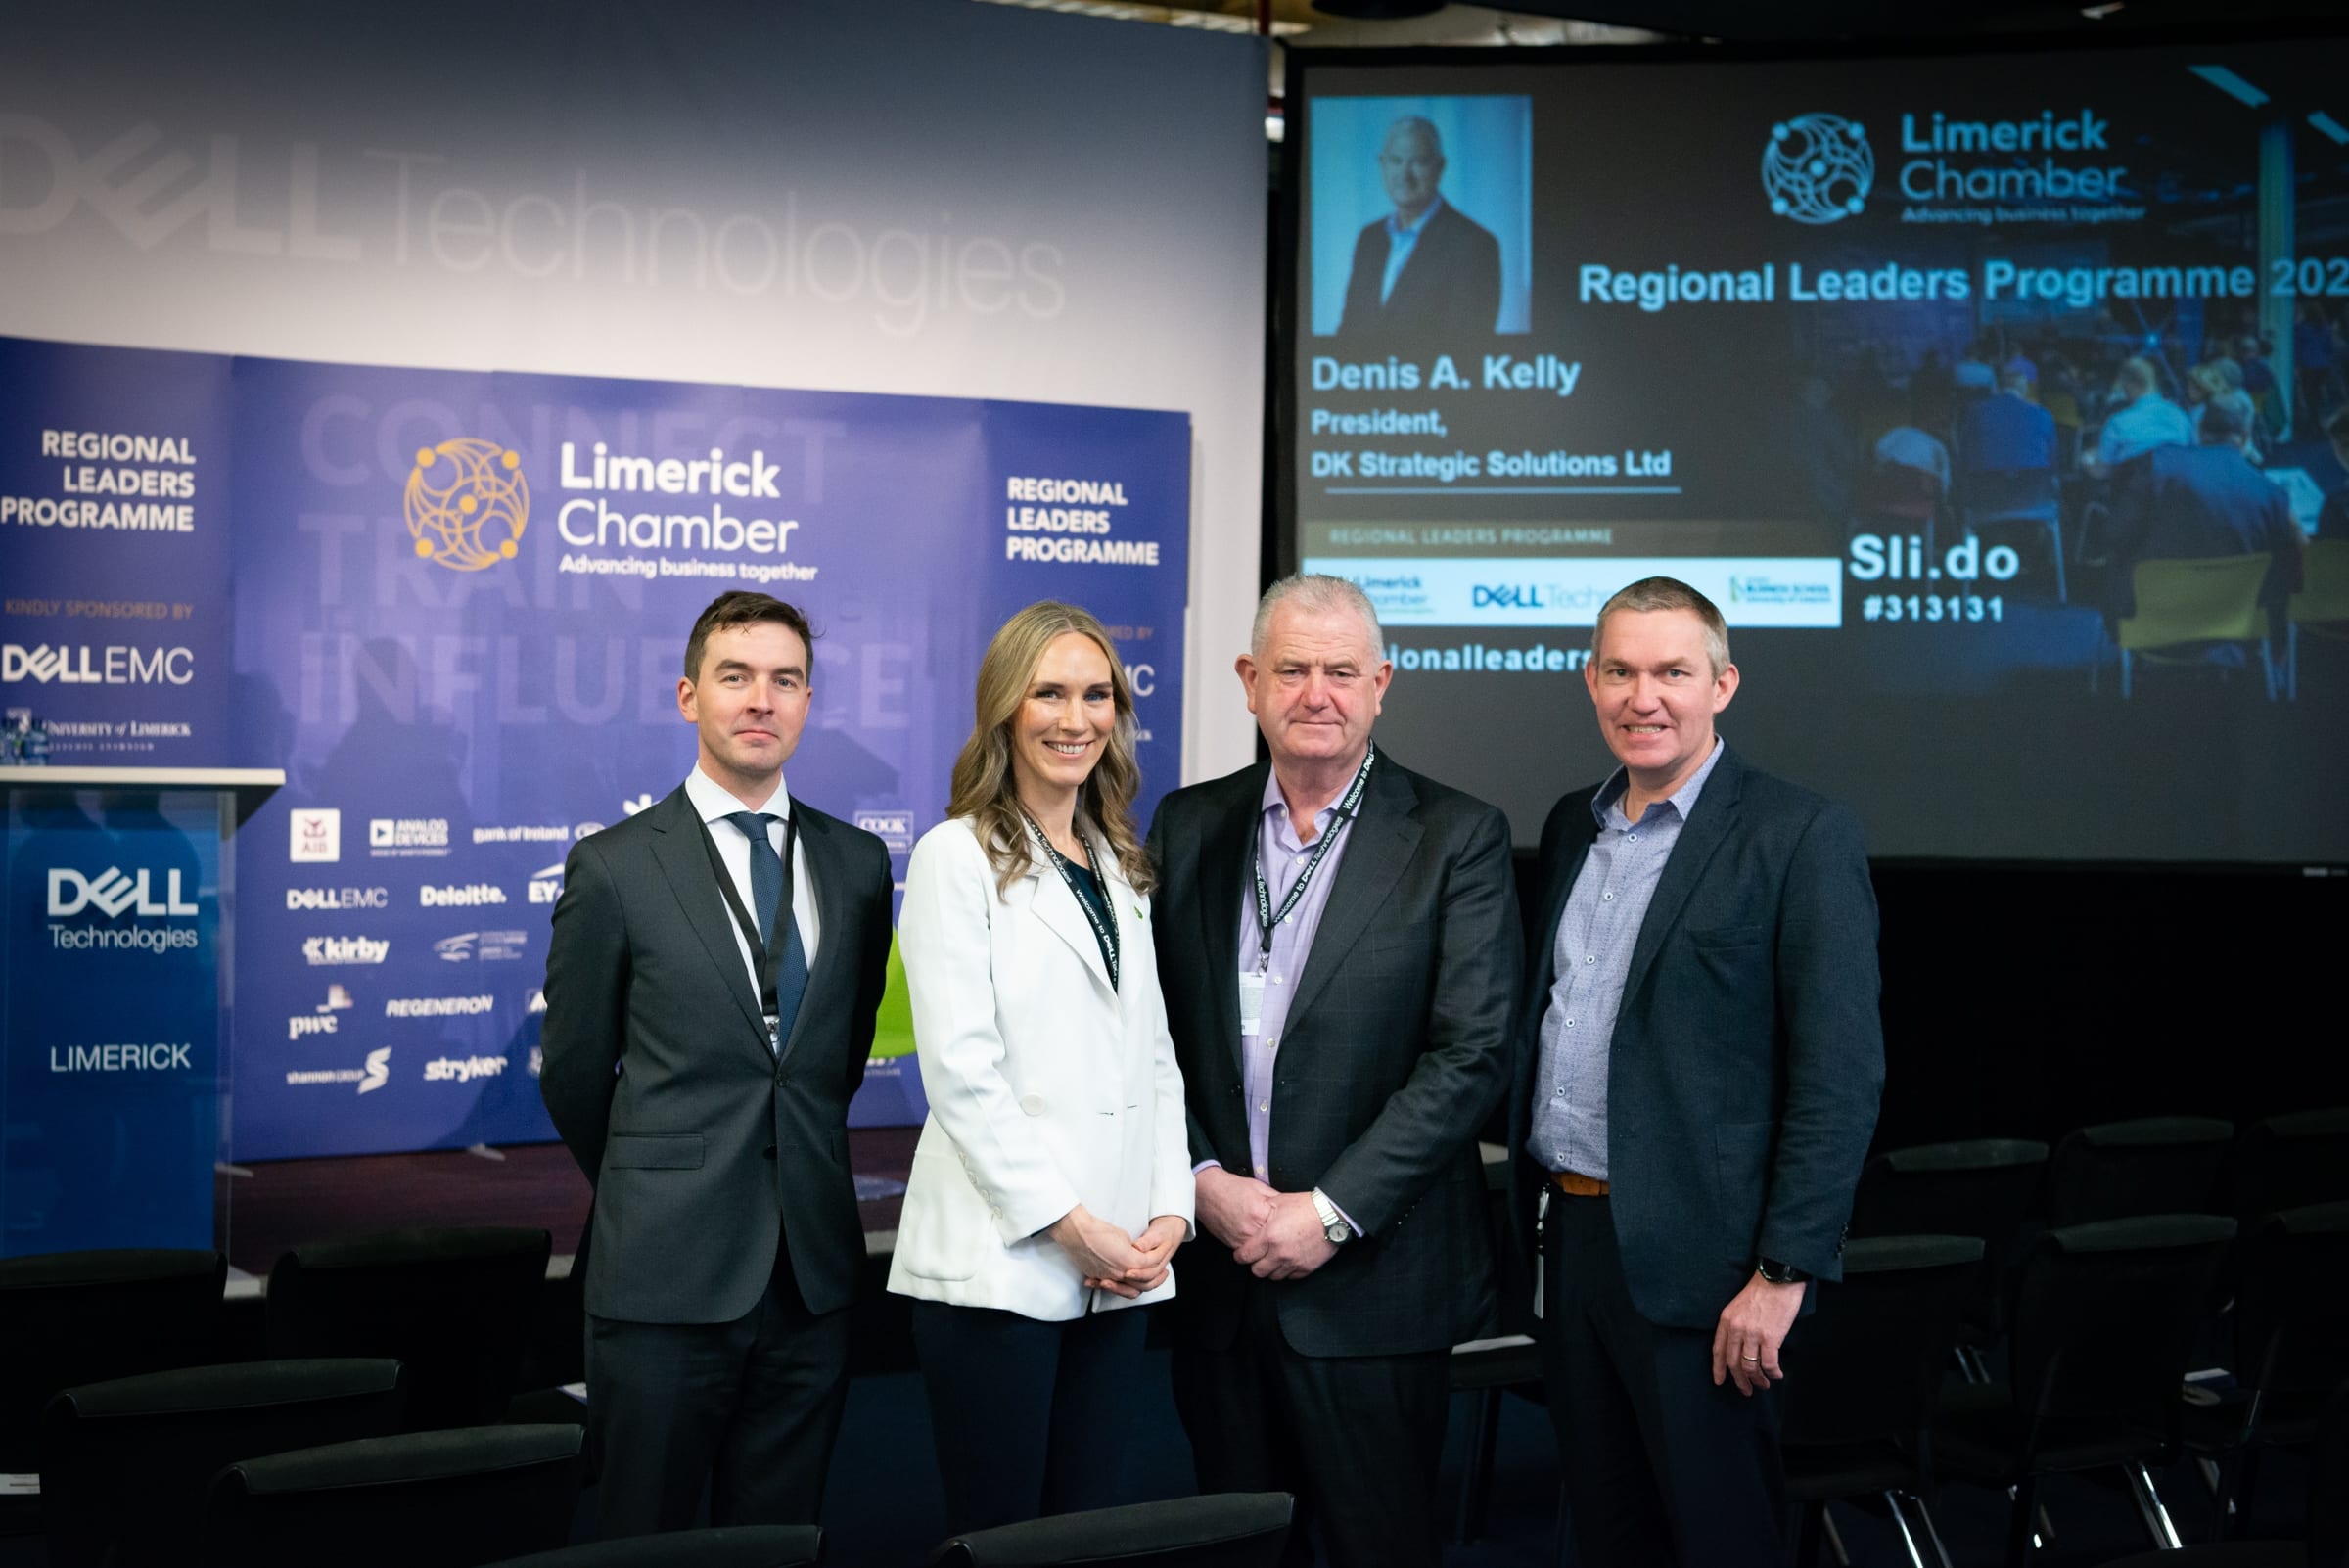 No repro fee-RLP Programme Launch which was held in DELL EMC, Raheen Industrial Est Limerick on Thursday 6th February - From Left to Right: Dr Stephen Kinsella - Kemmy Business School, UL, Dee Ryan - CEO Limerick Chamber, Denis A Kelly - DK Strategic Solutions LTD.,  Sean O’Reilly - DELL EMC,.  
Photo credit Shauna Kennedy